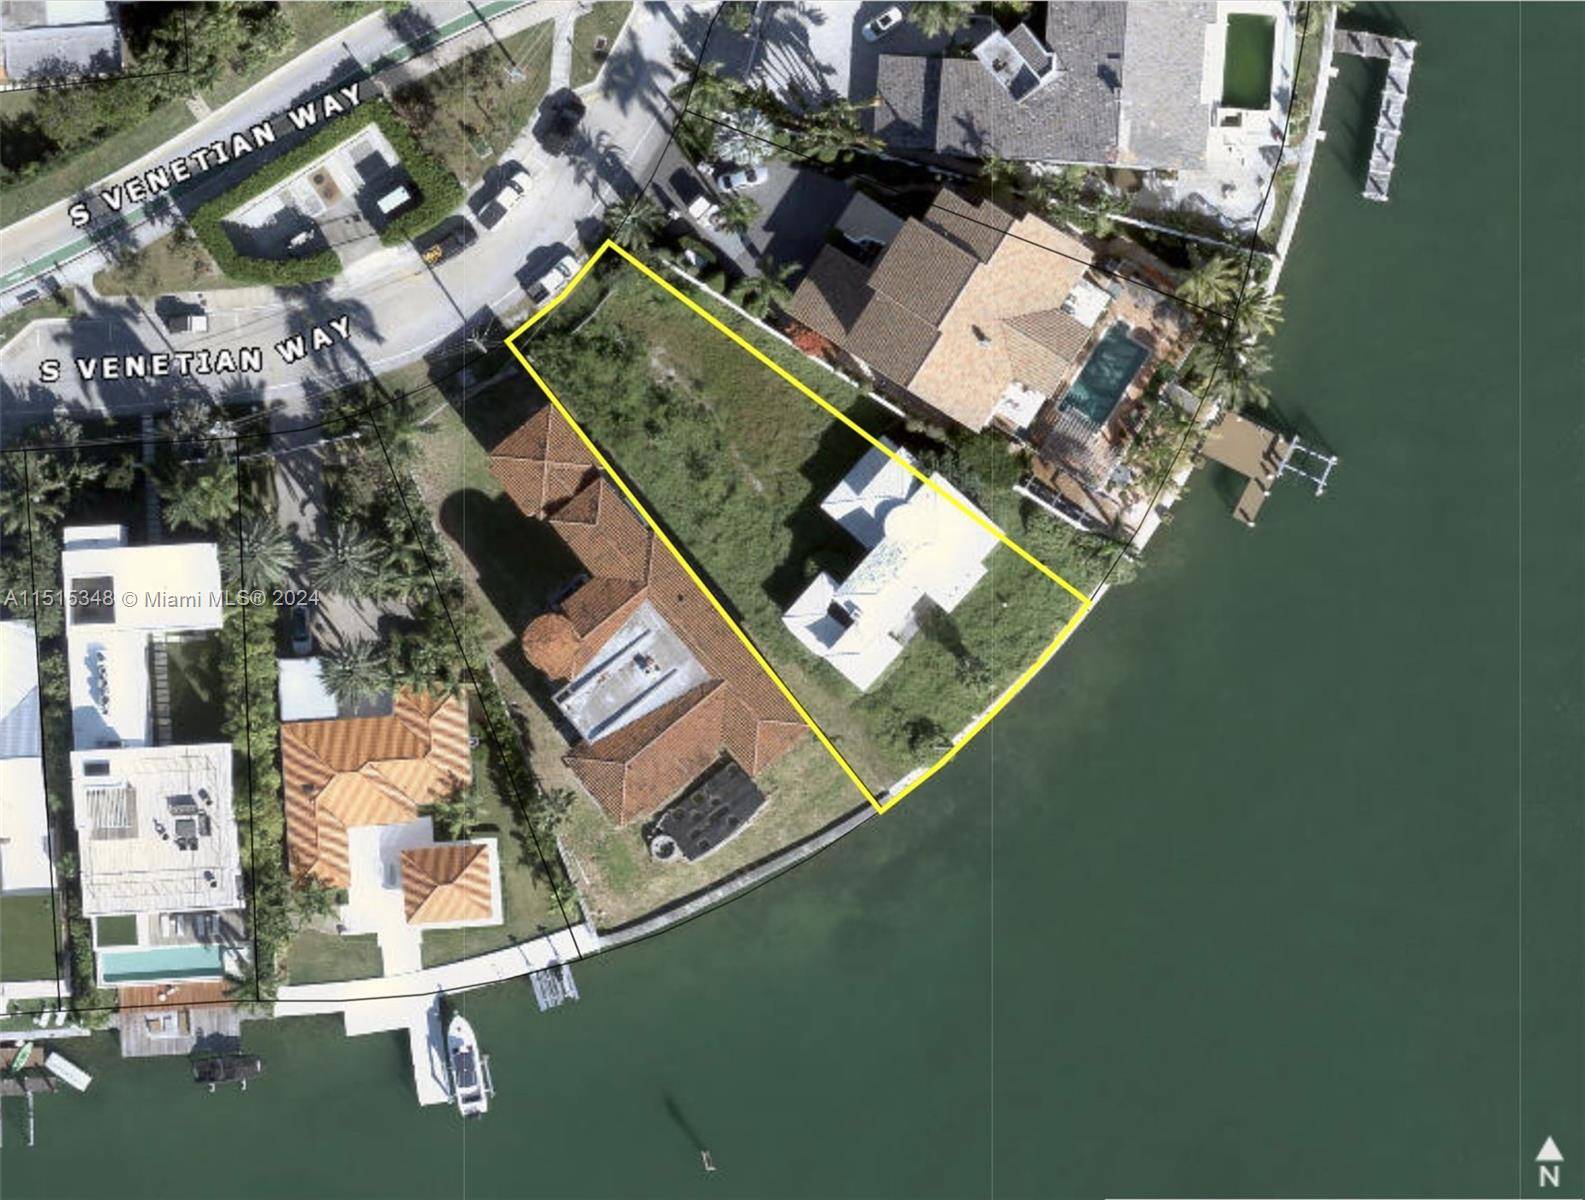 Don t miss the opportunity to build your dream home in one of the most coveted neighborhoods in Miami, the Venetian islands.